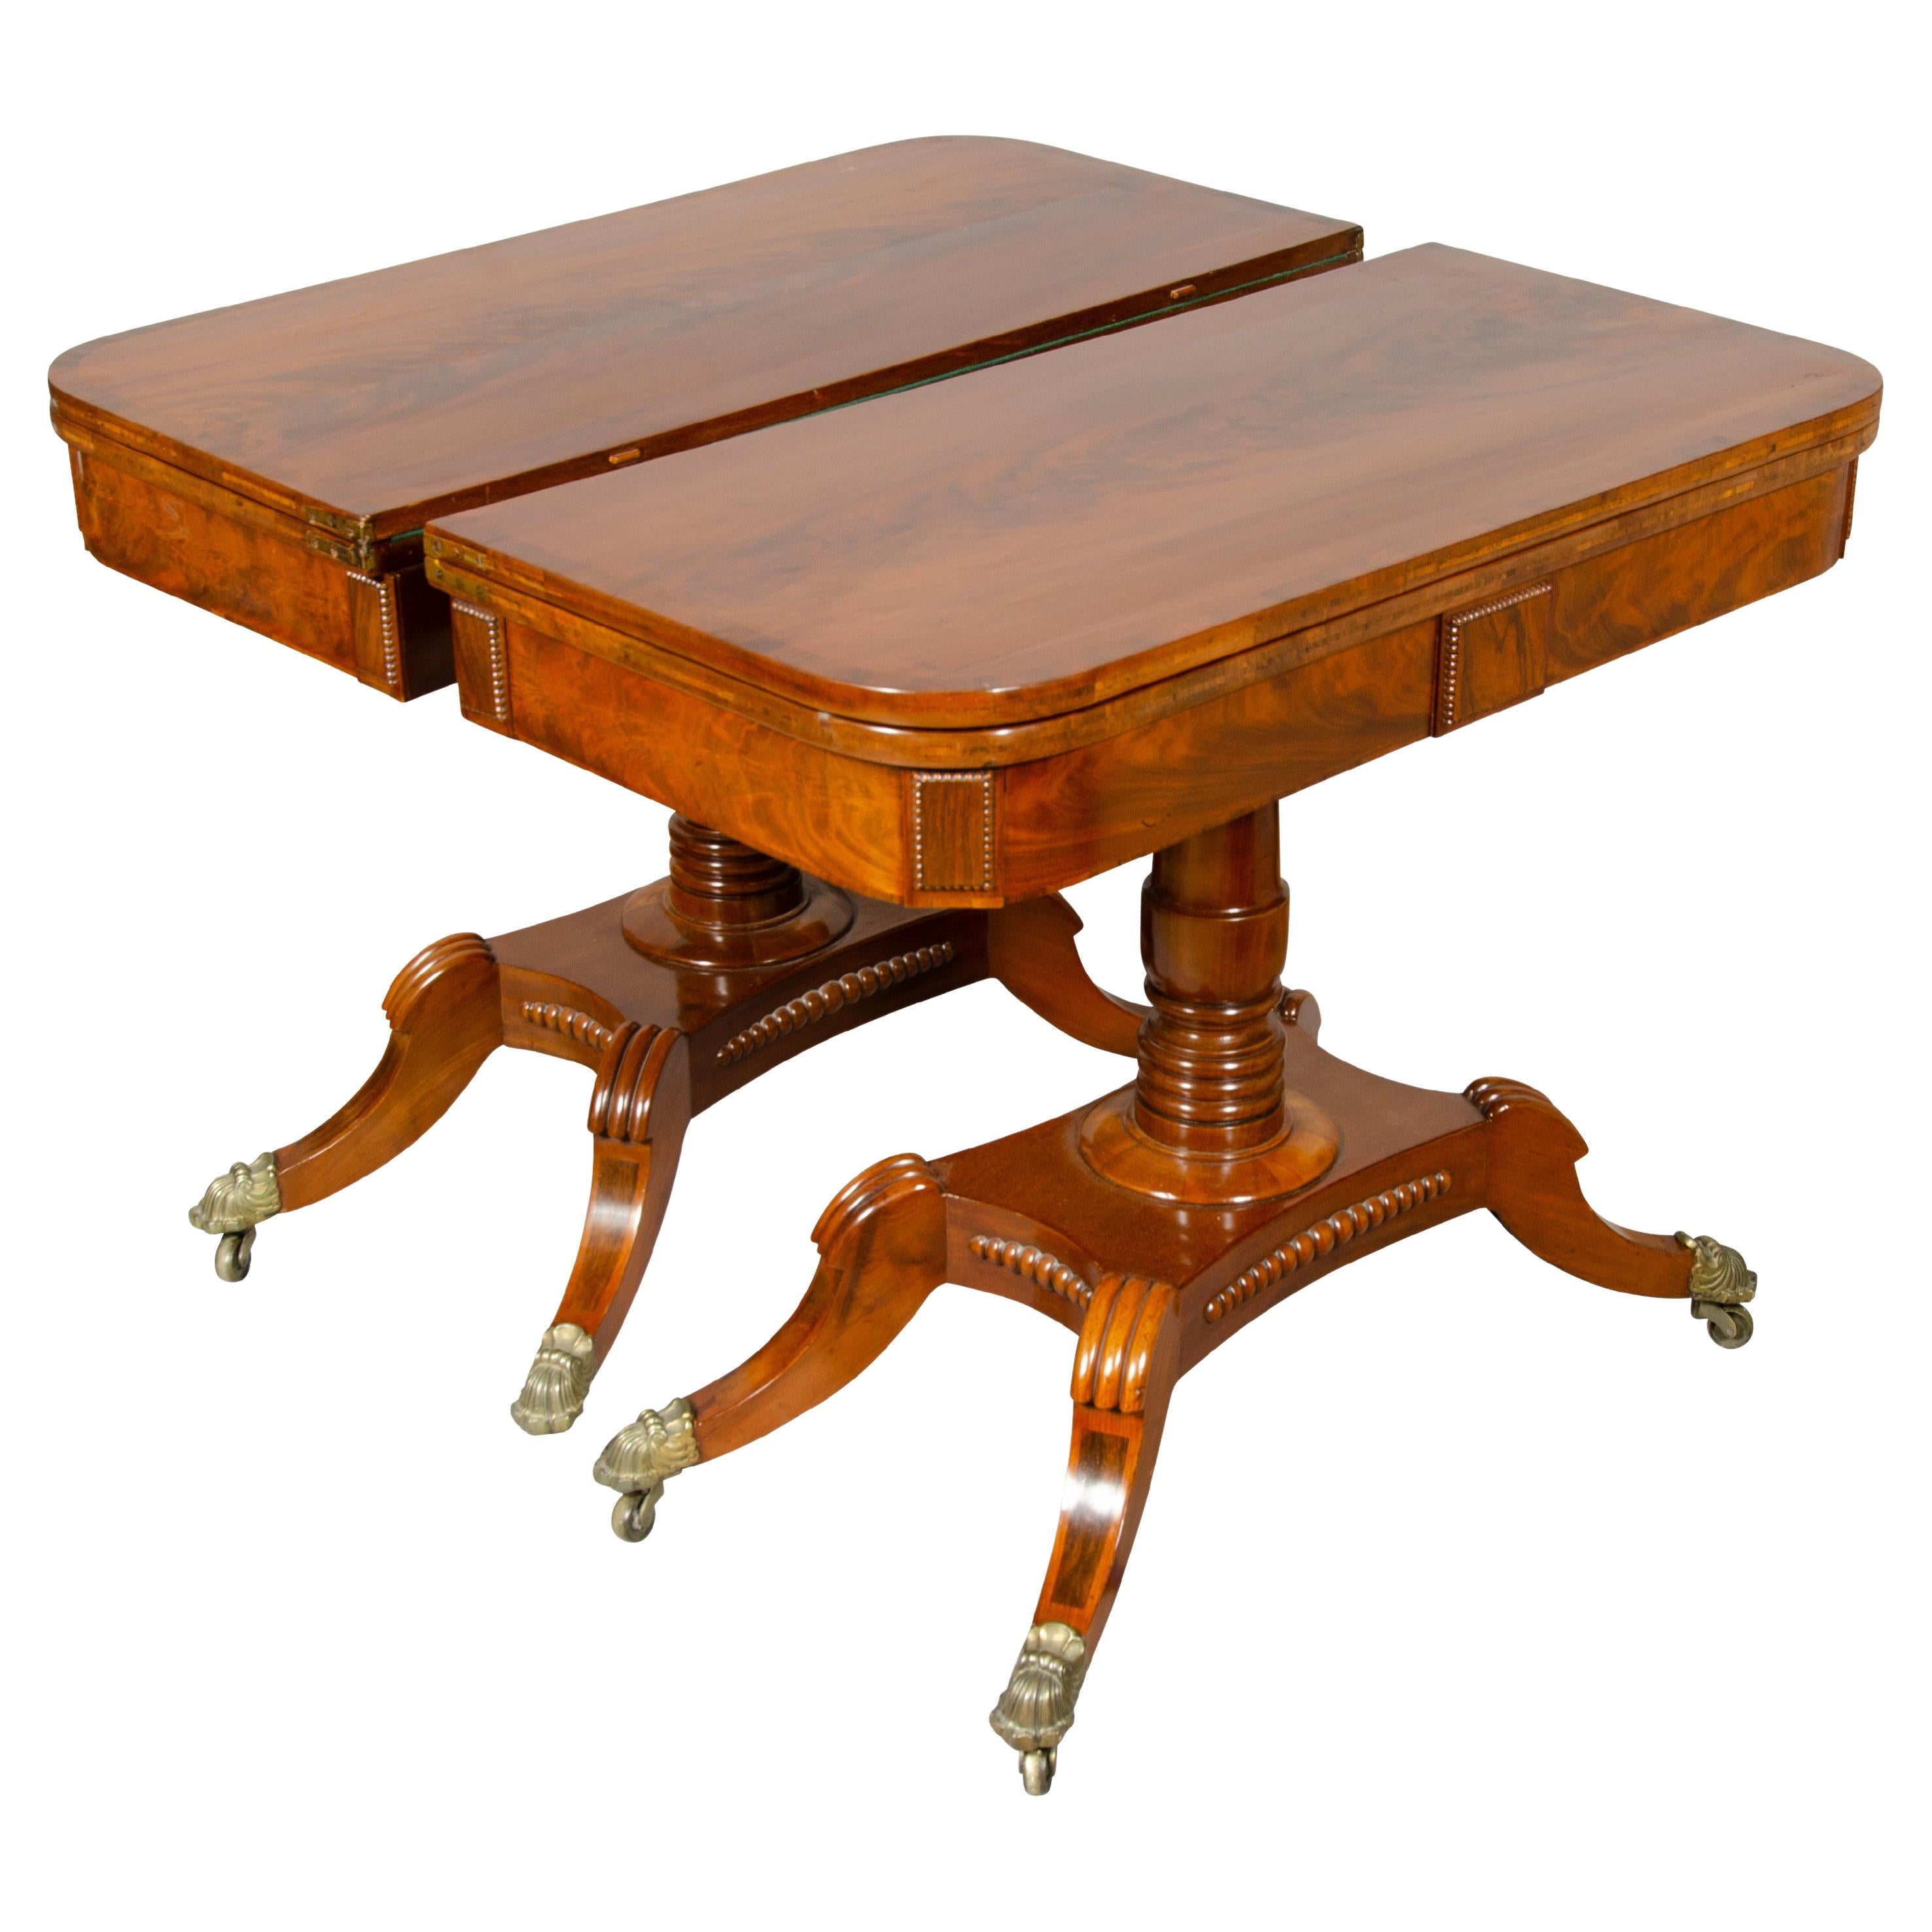 Each with hinged crossbanded top over a frieze with central tablet. Top flips open to a green baize playing surface. The top swivels enabling the top to flip for a card table size surface, raised on a turned support, saber legs and casters.